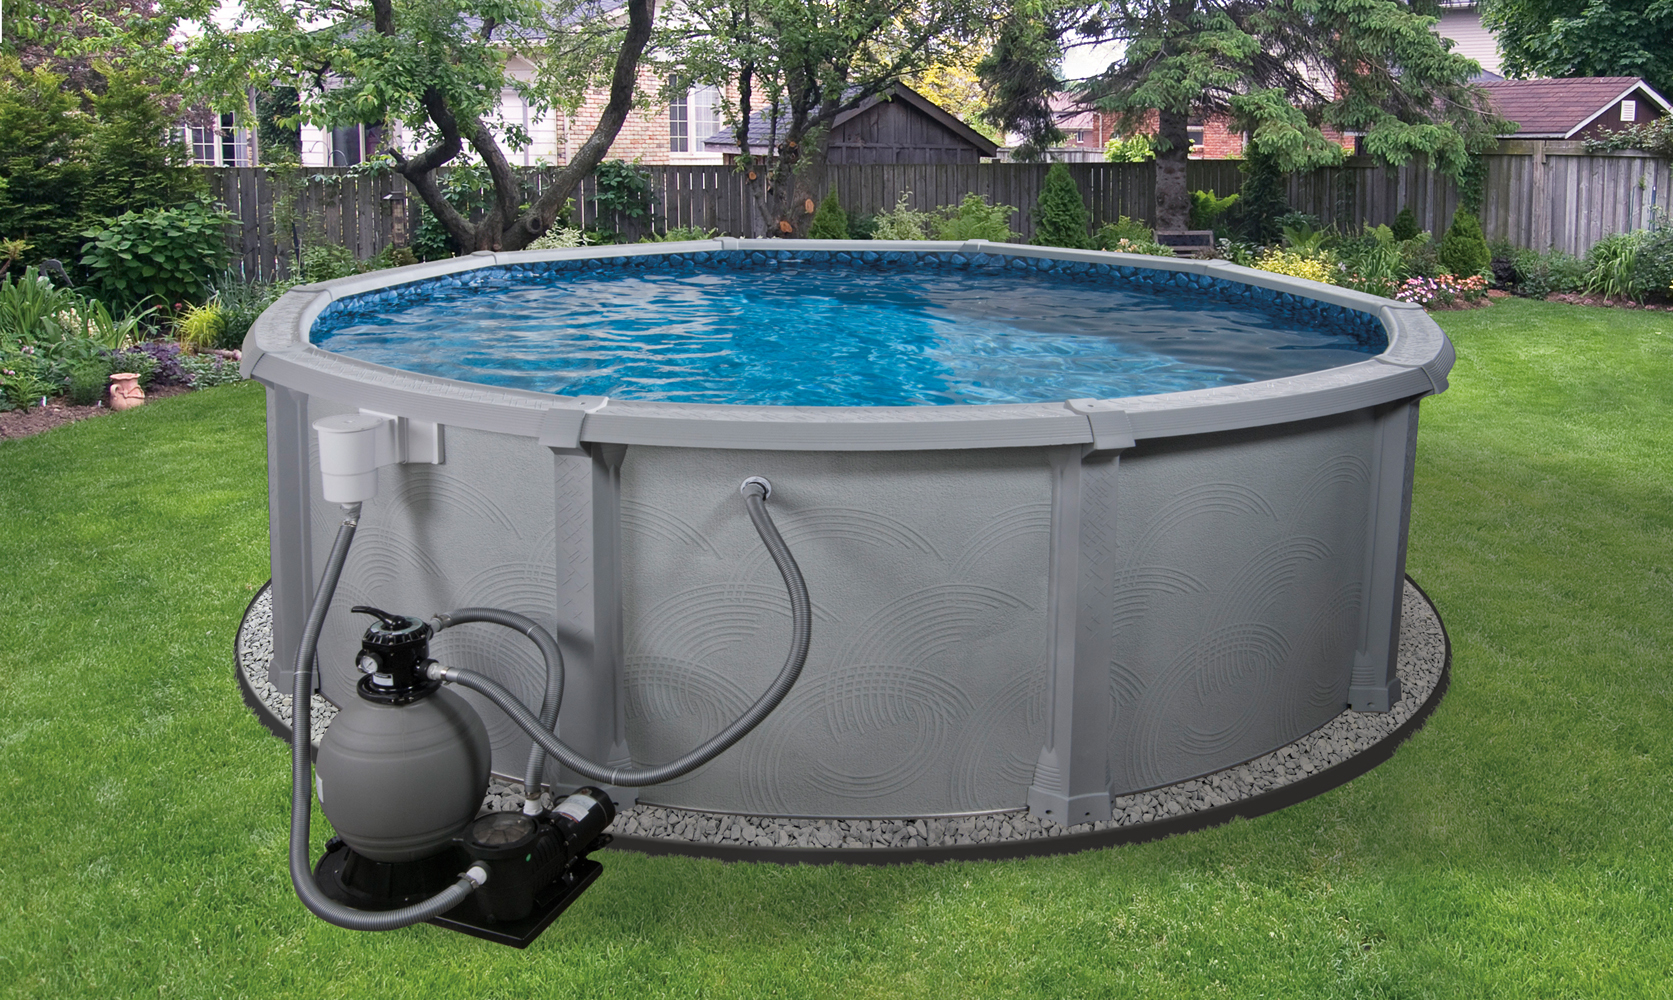  Above Ground Swimming Pools For Sale News Update